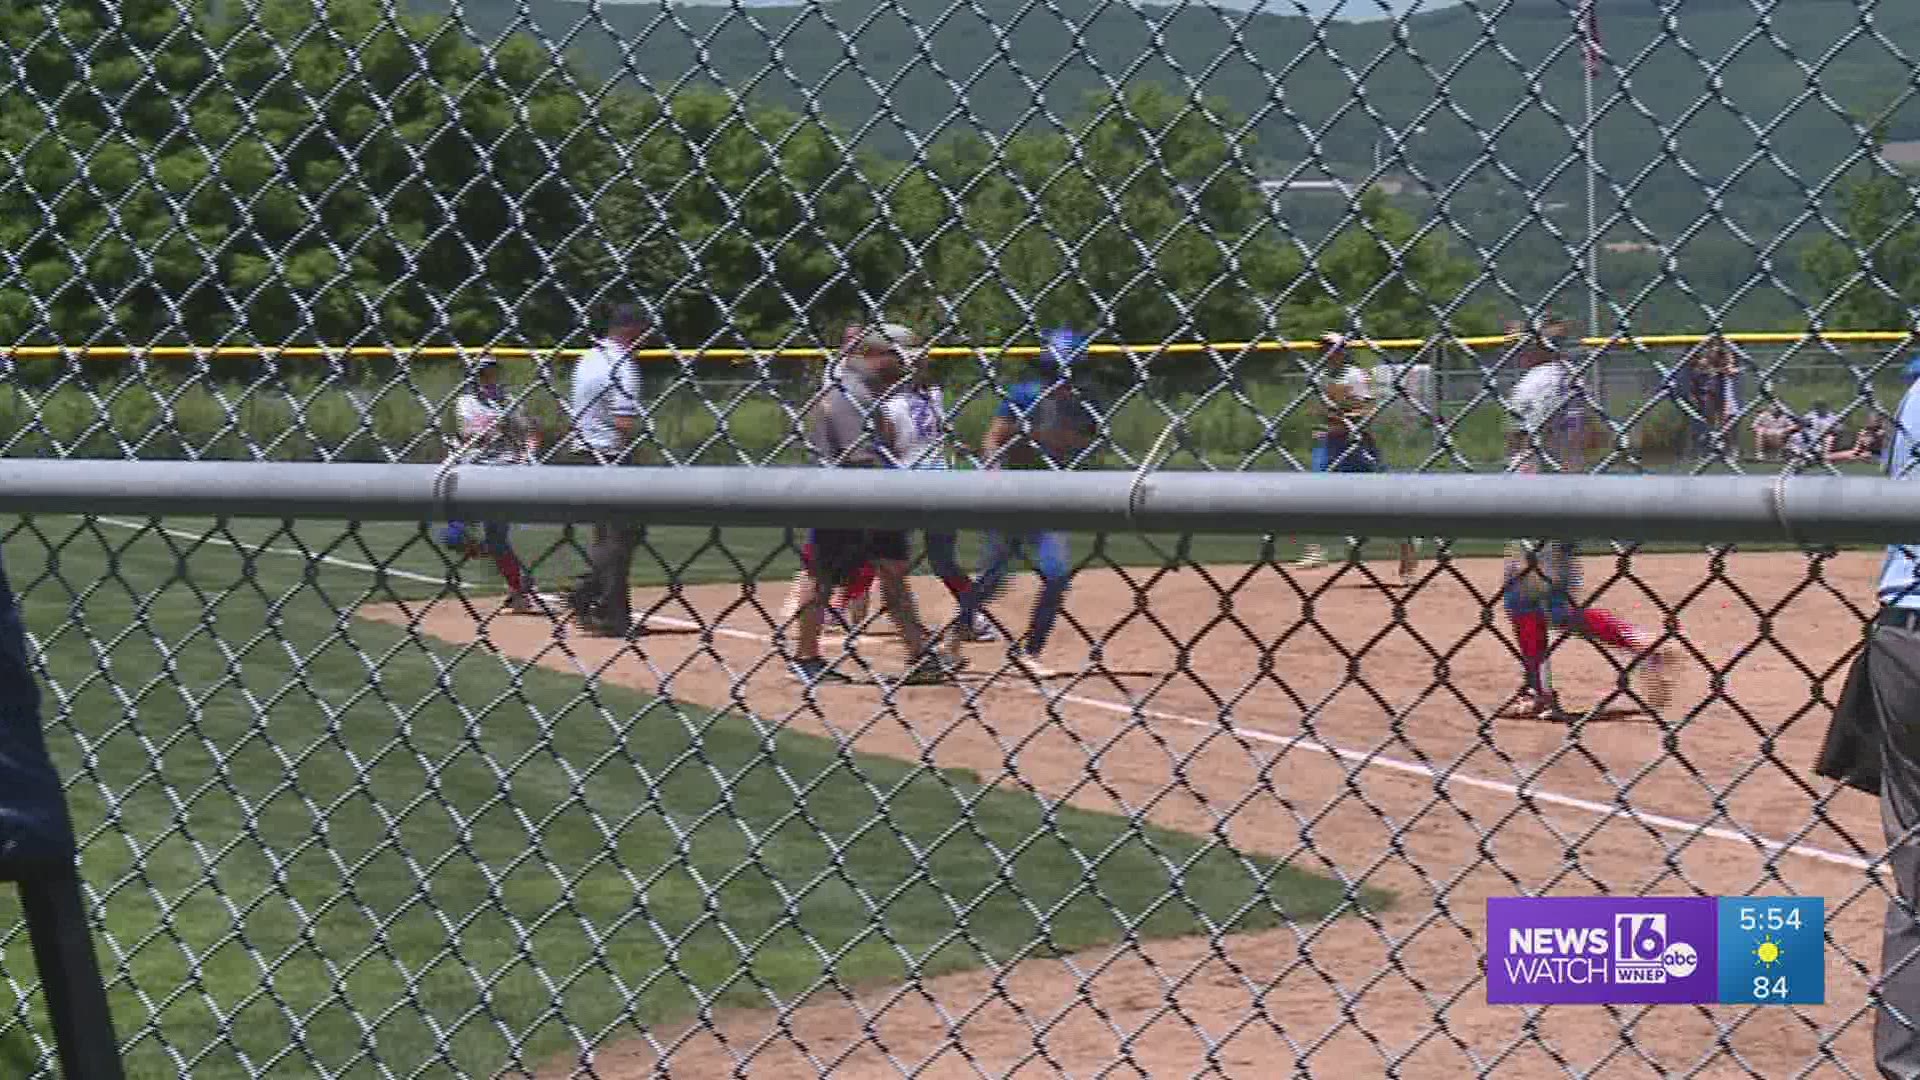 Mid Valley rallied with a walk off 7-6 win over North Schuylkill in the State Softball playoffs.